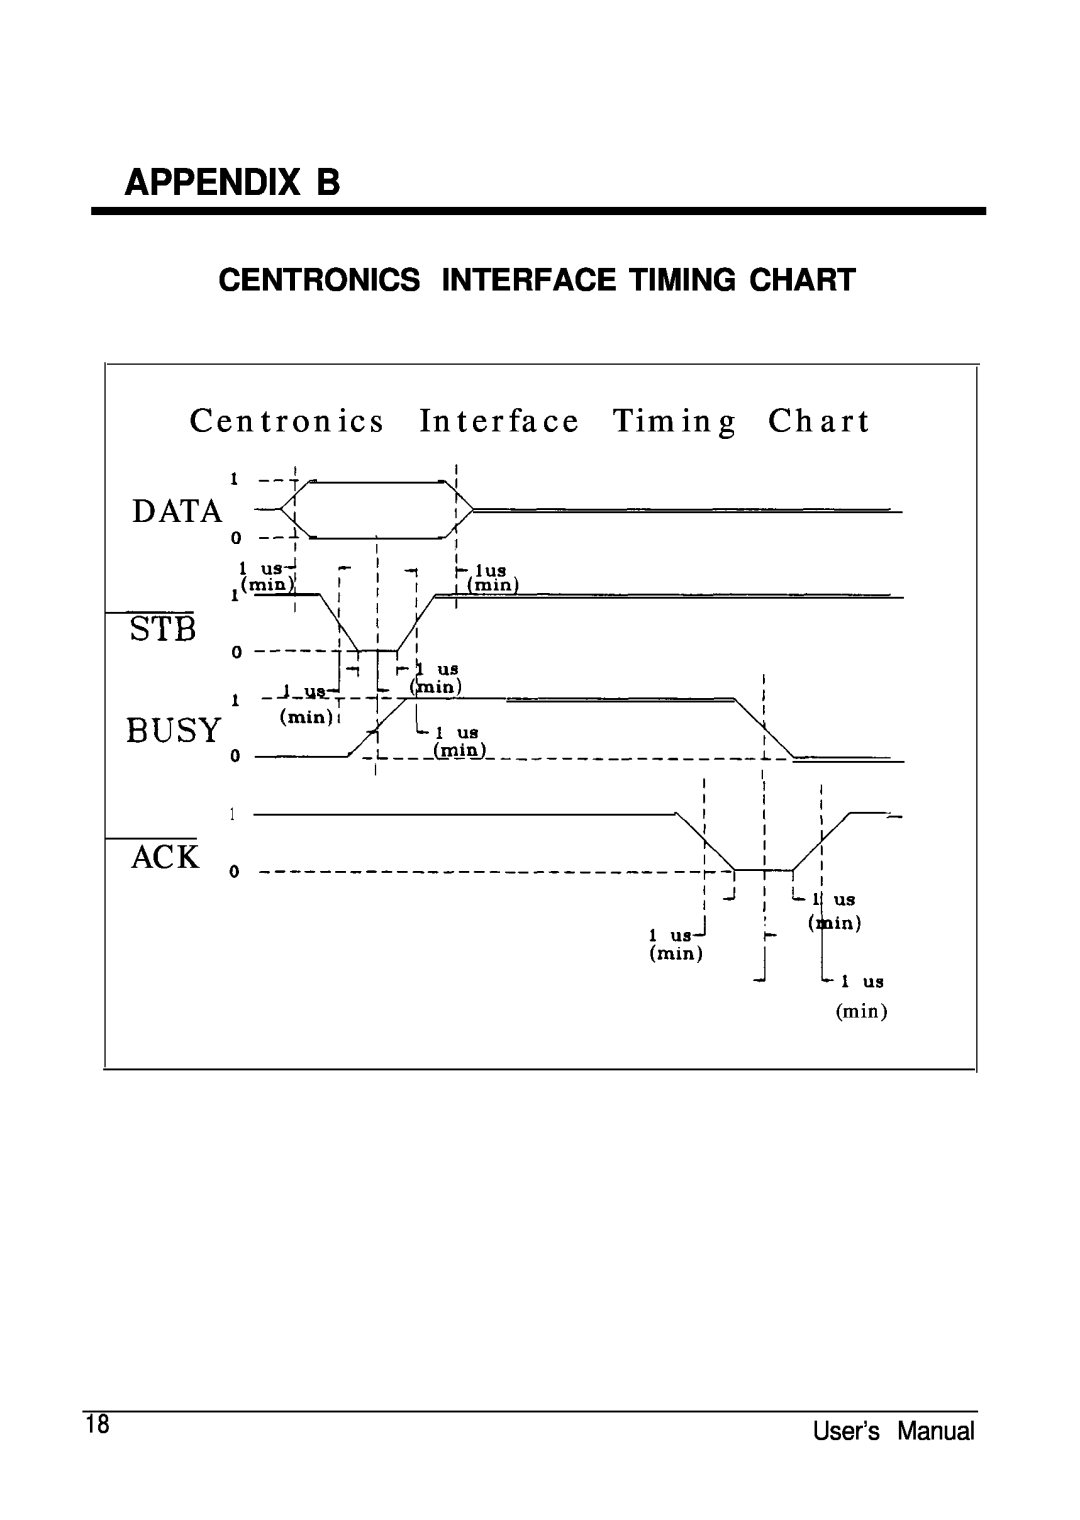 ATEN Technology AS-811S, AS-811P, AS-411P, AS-411S user manual Appendix B, Centronics Interface Timing Chart, Data 